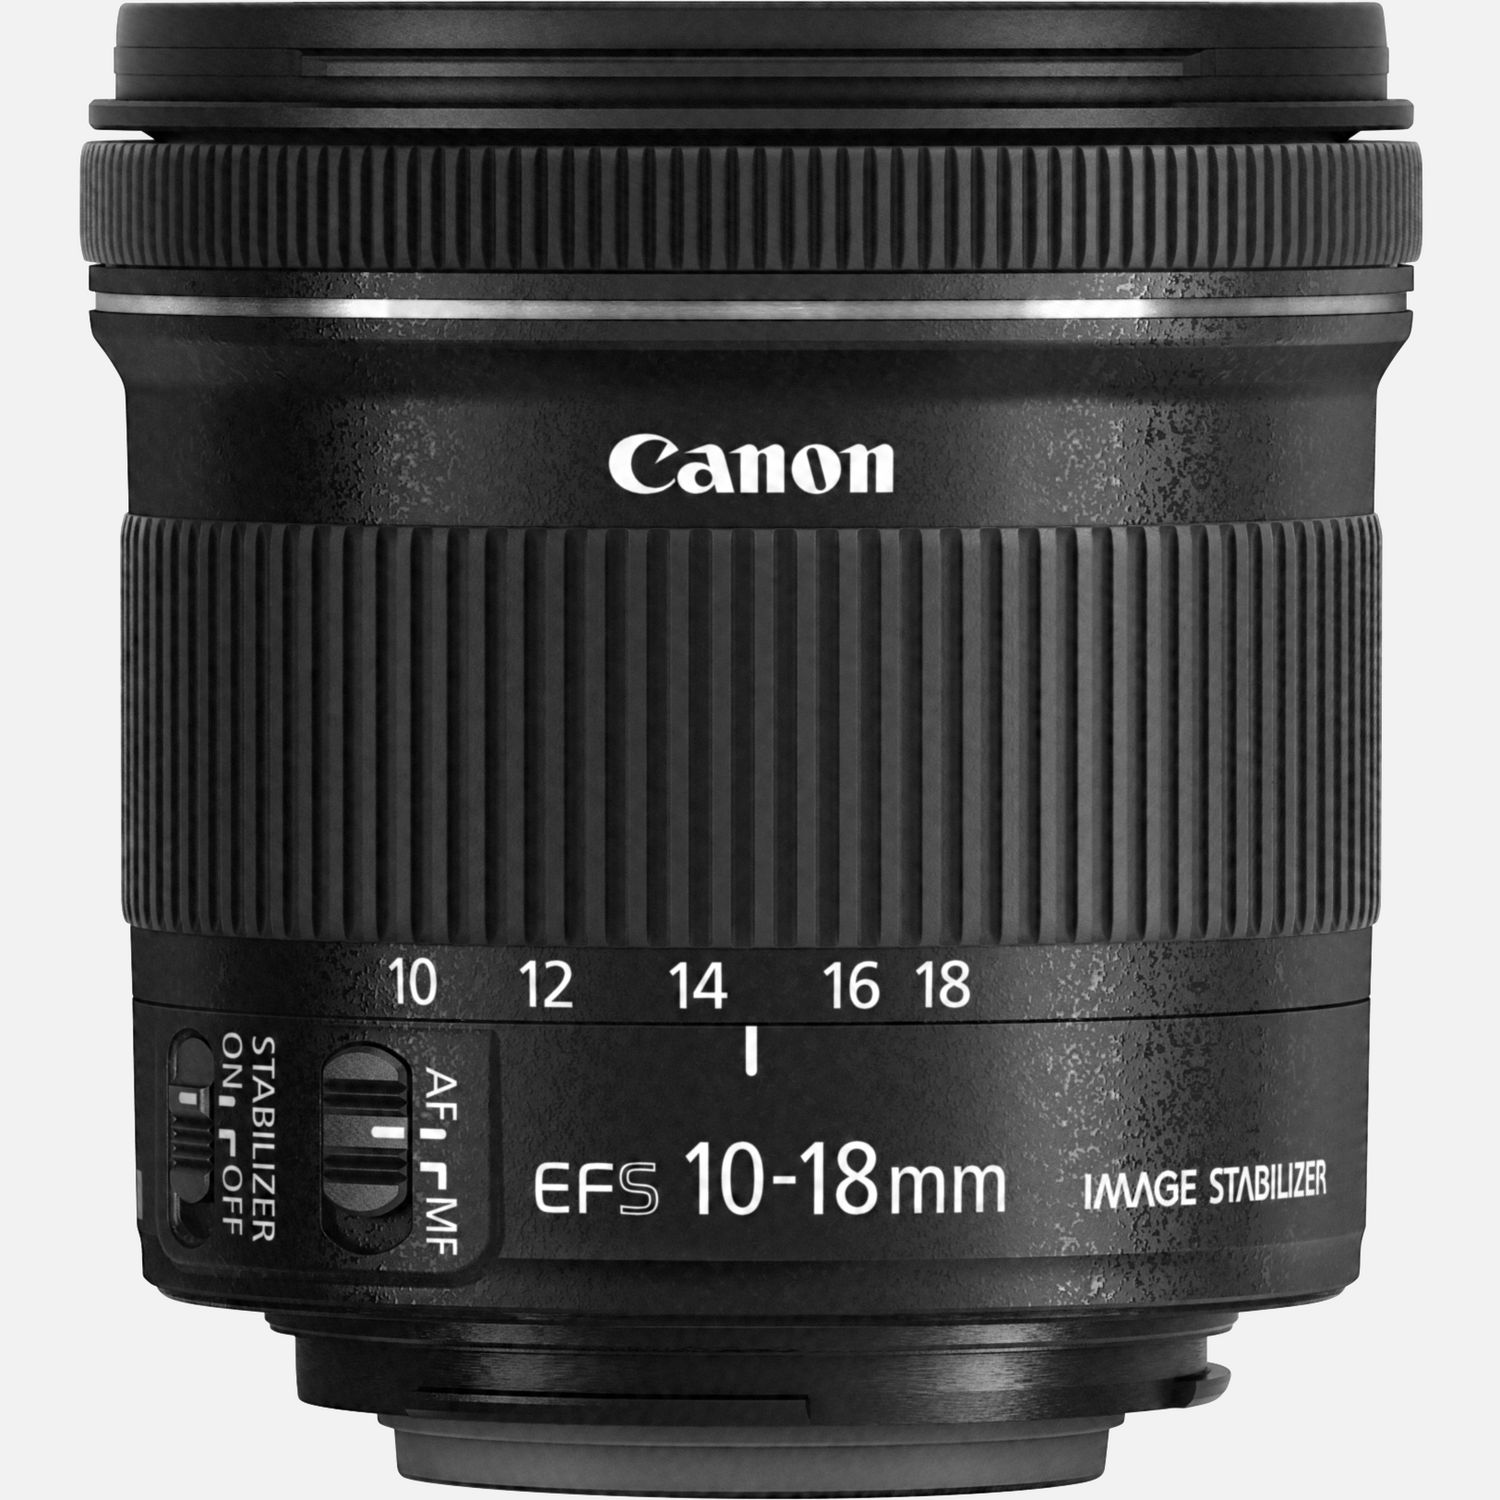 Canon fit wide angle lens